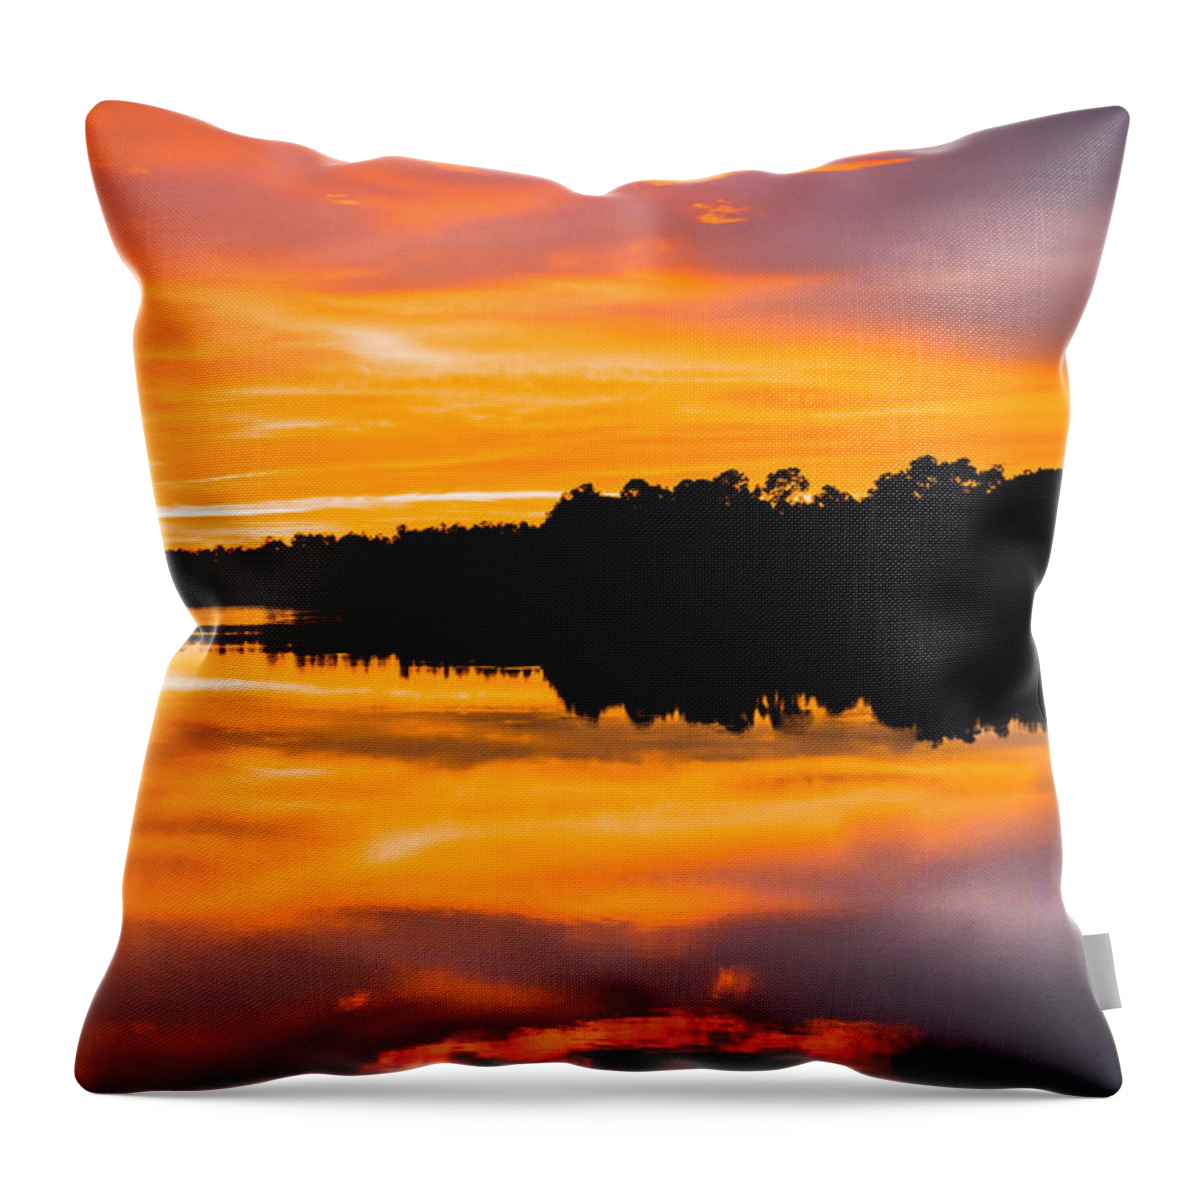 Sunset Throw Pillow featuring the photograph Sunset Colors by Parker Cunningham